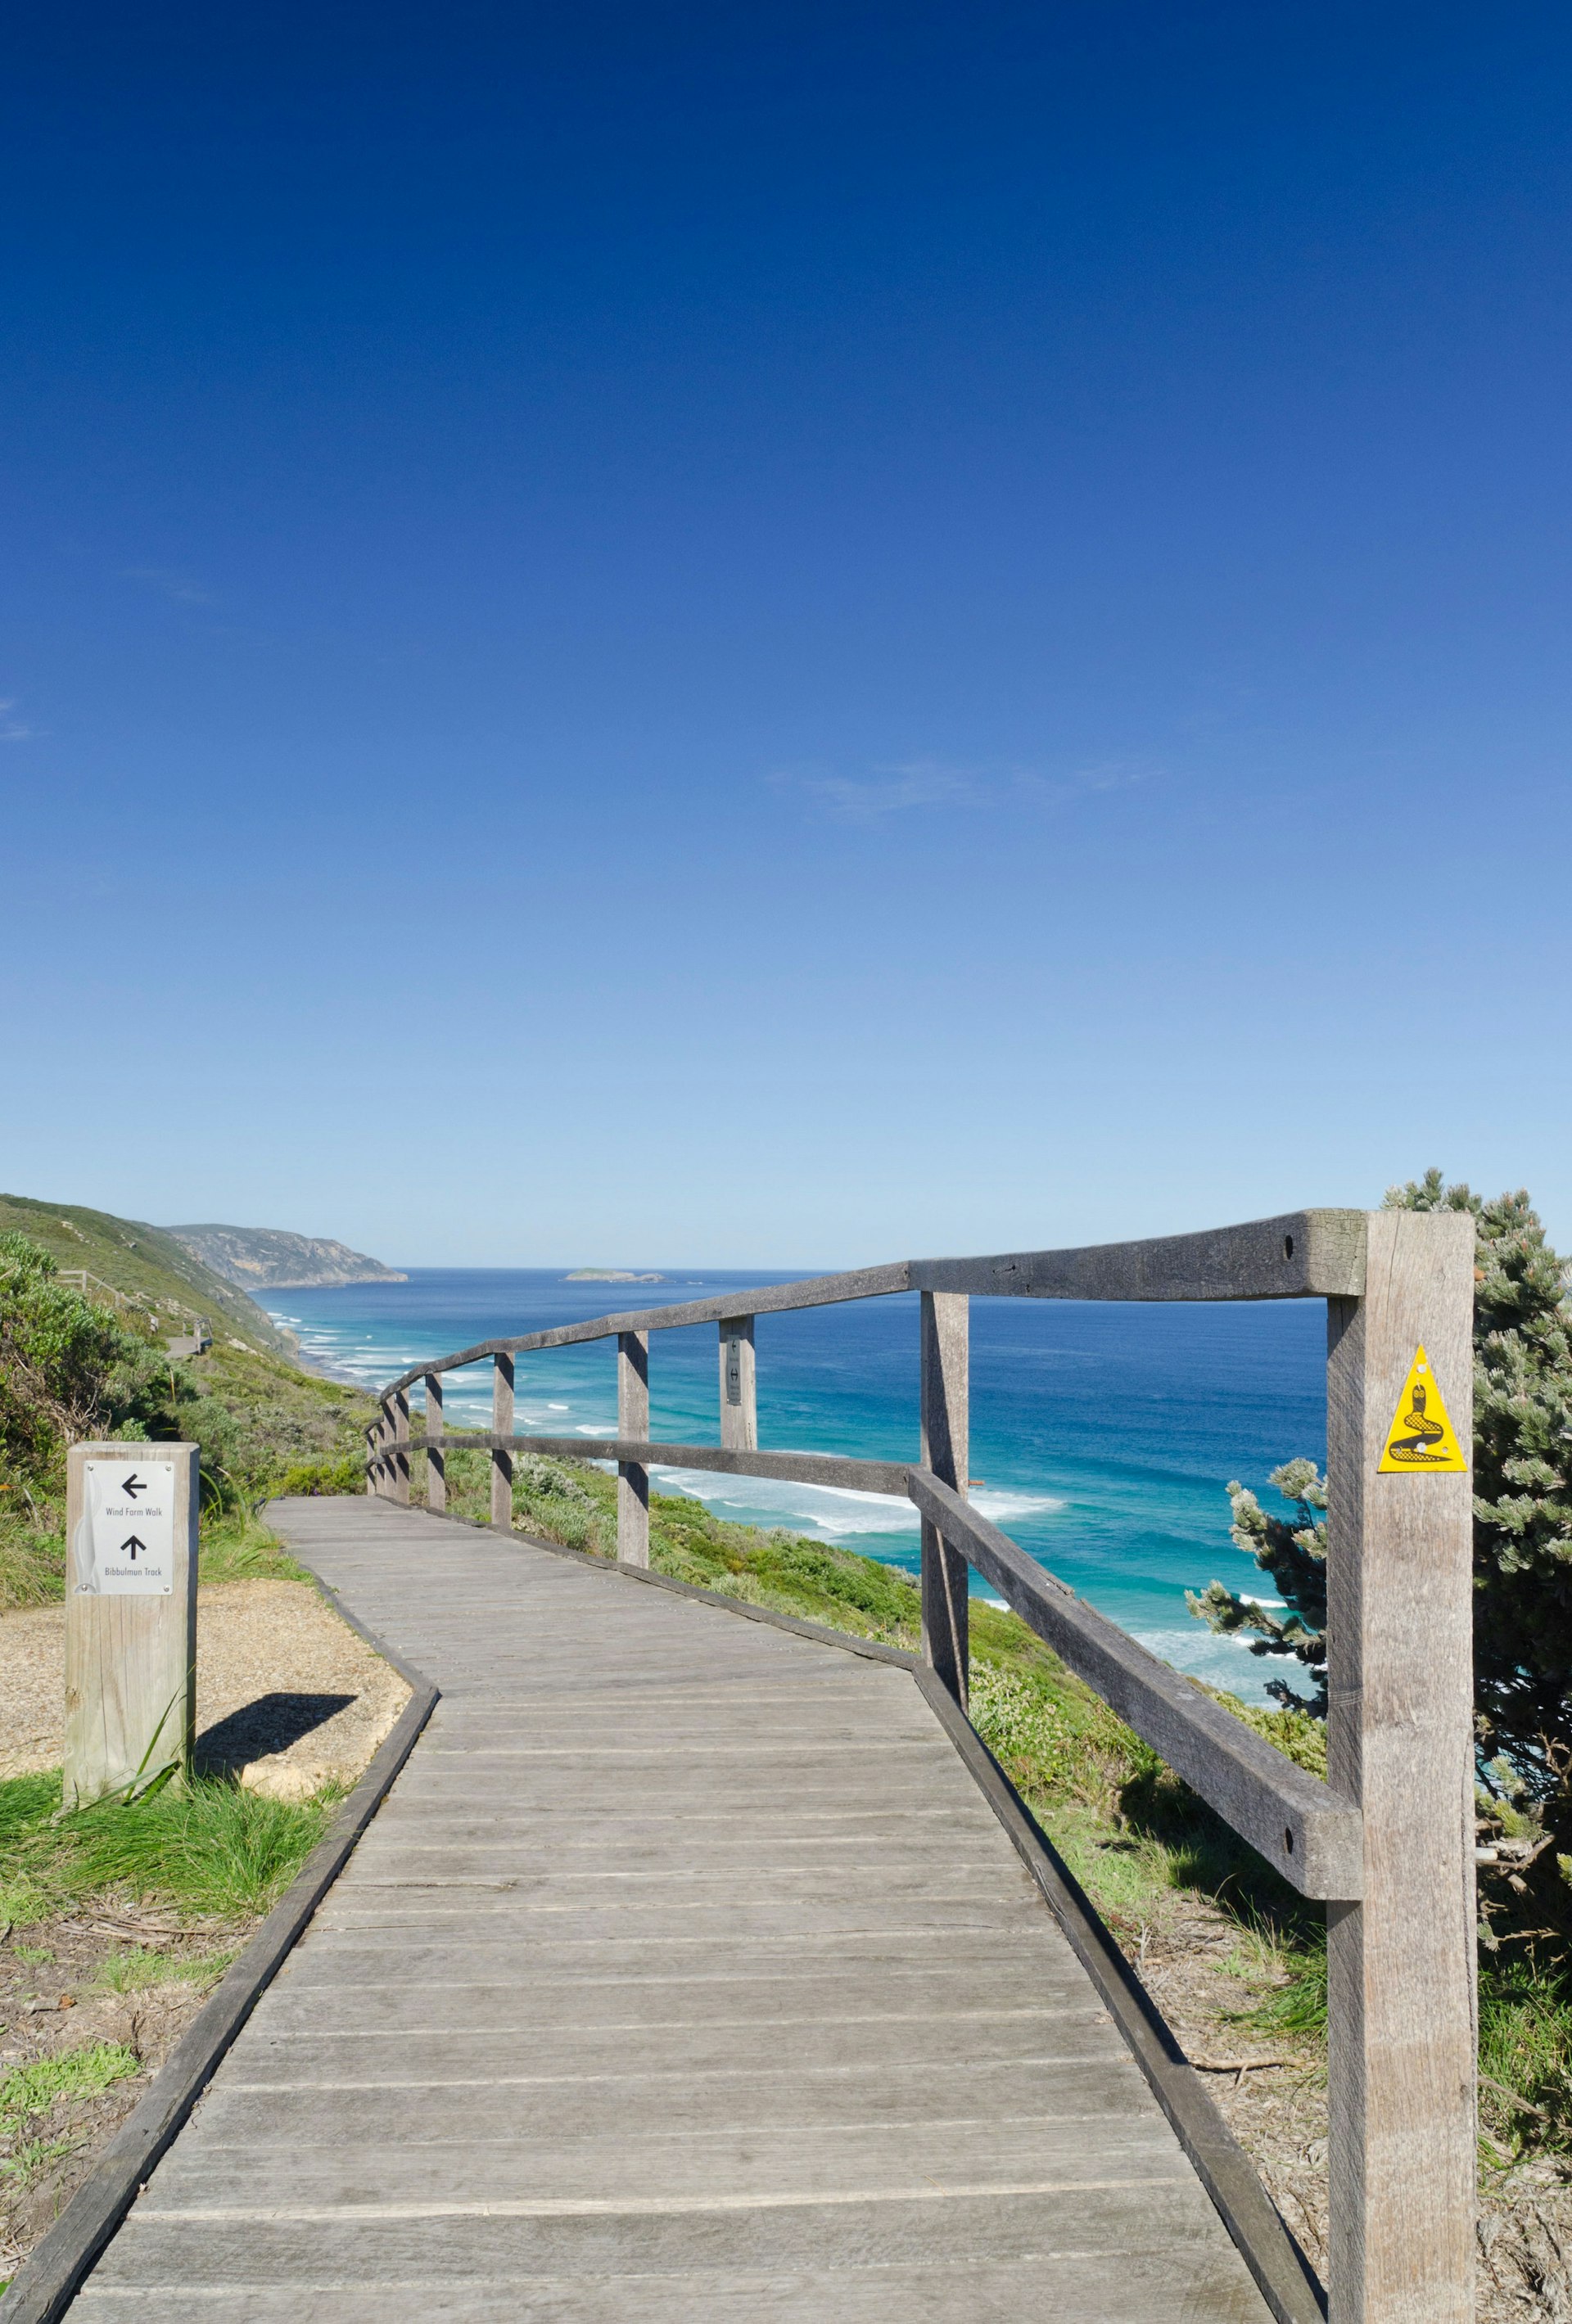 A boardwalk leads along a stunning section of coast in Western Australia; a yellow triangle badge on the railing has a black snake emblem, the sign for the Bibbulman Track.